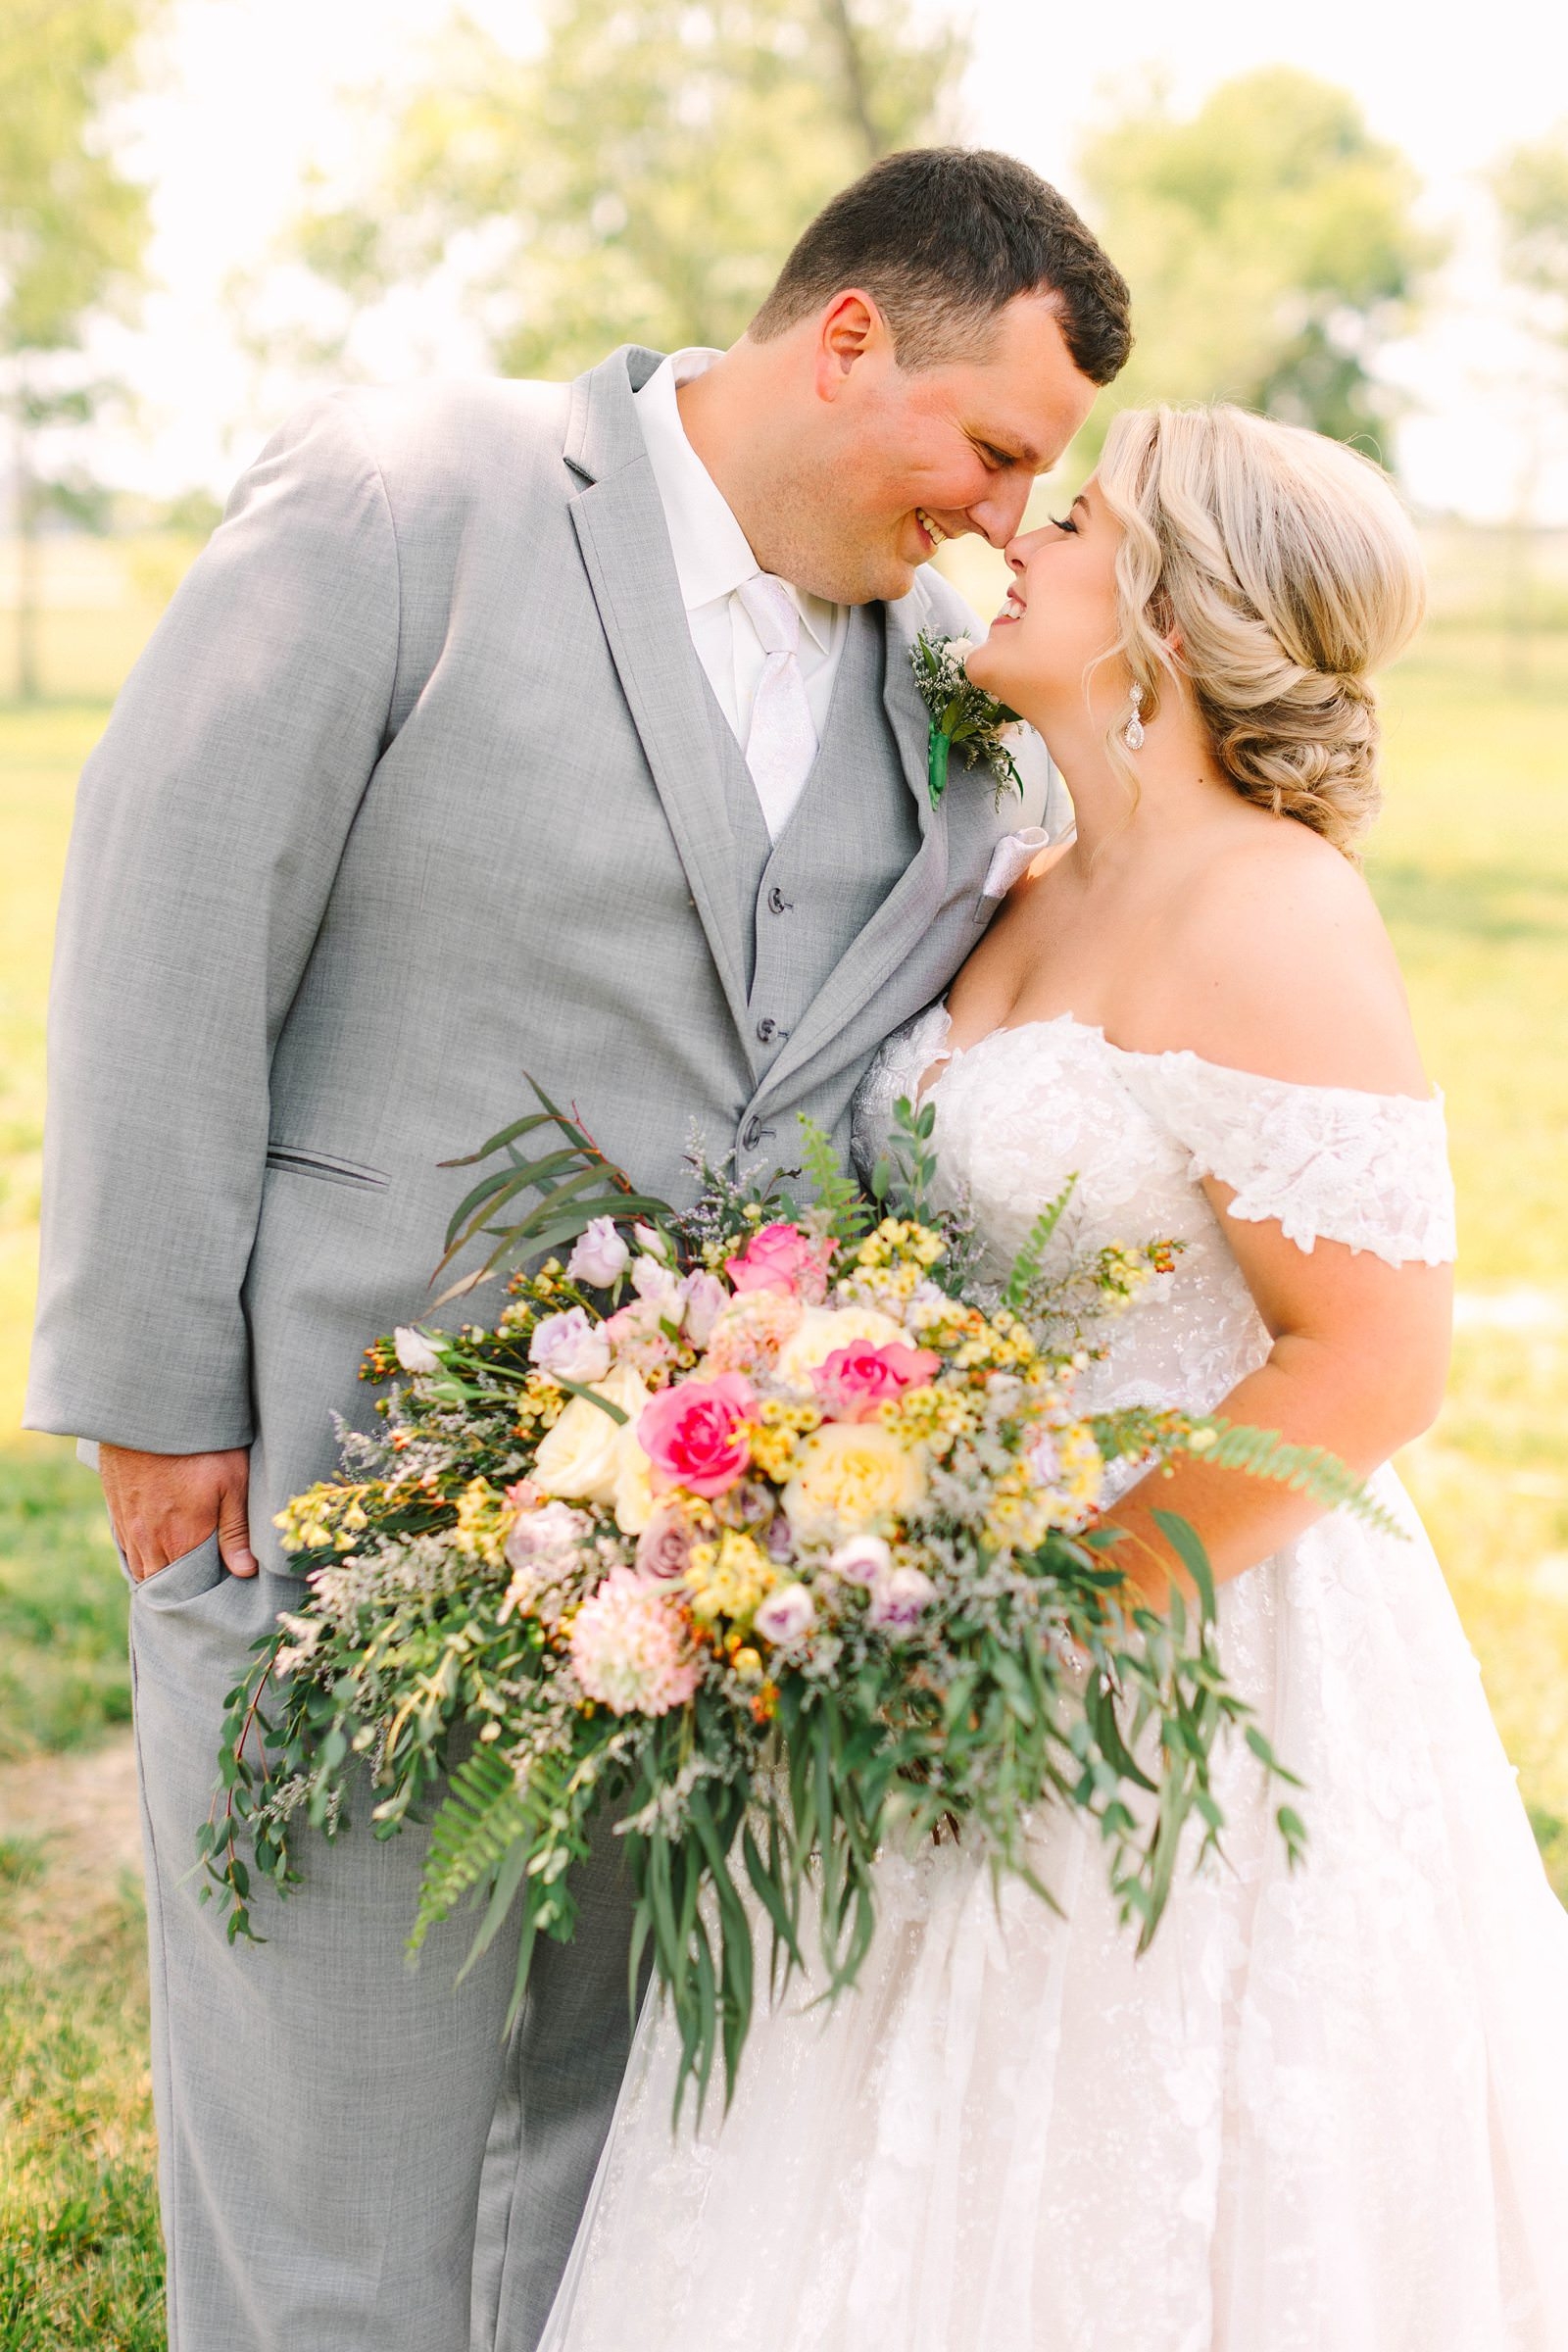 A Sunny Summer Wedding at Friedman Park in Newburgh Indiana | Paige and Dylan | Bret and Brandie Photography072.jpg